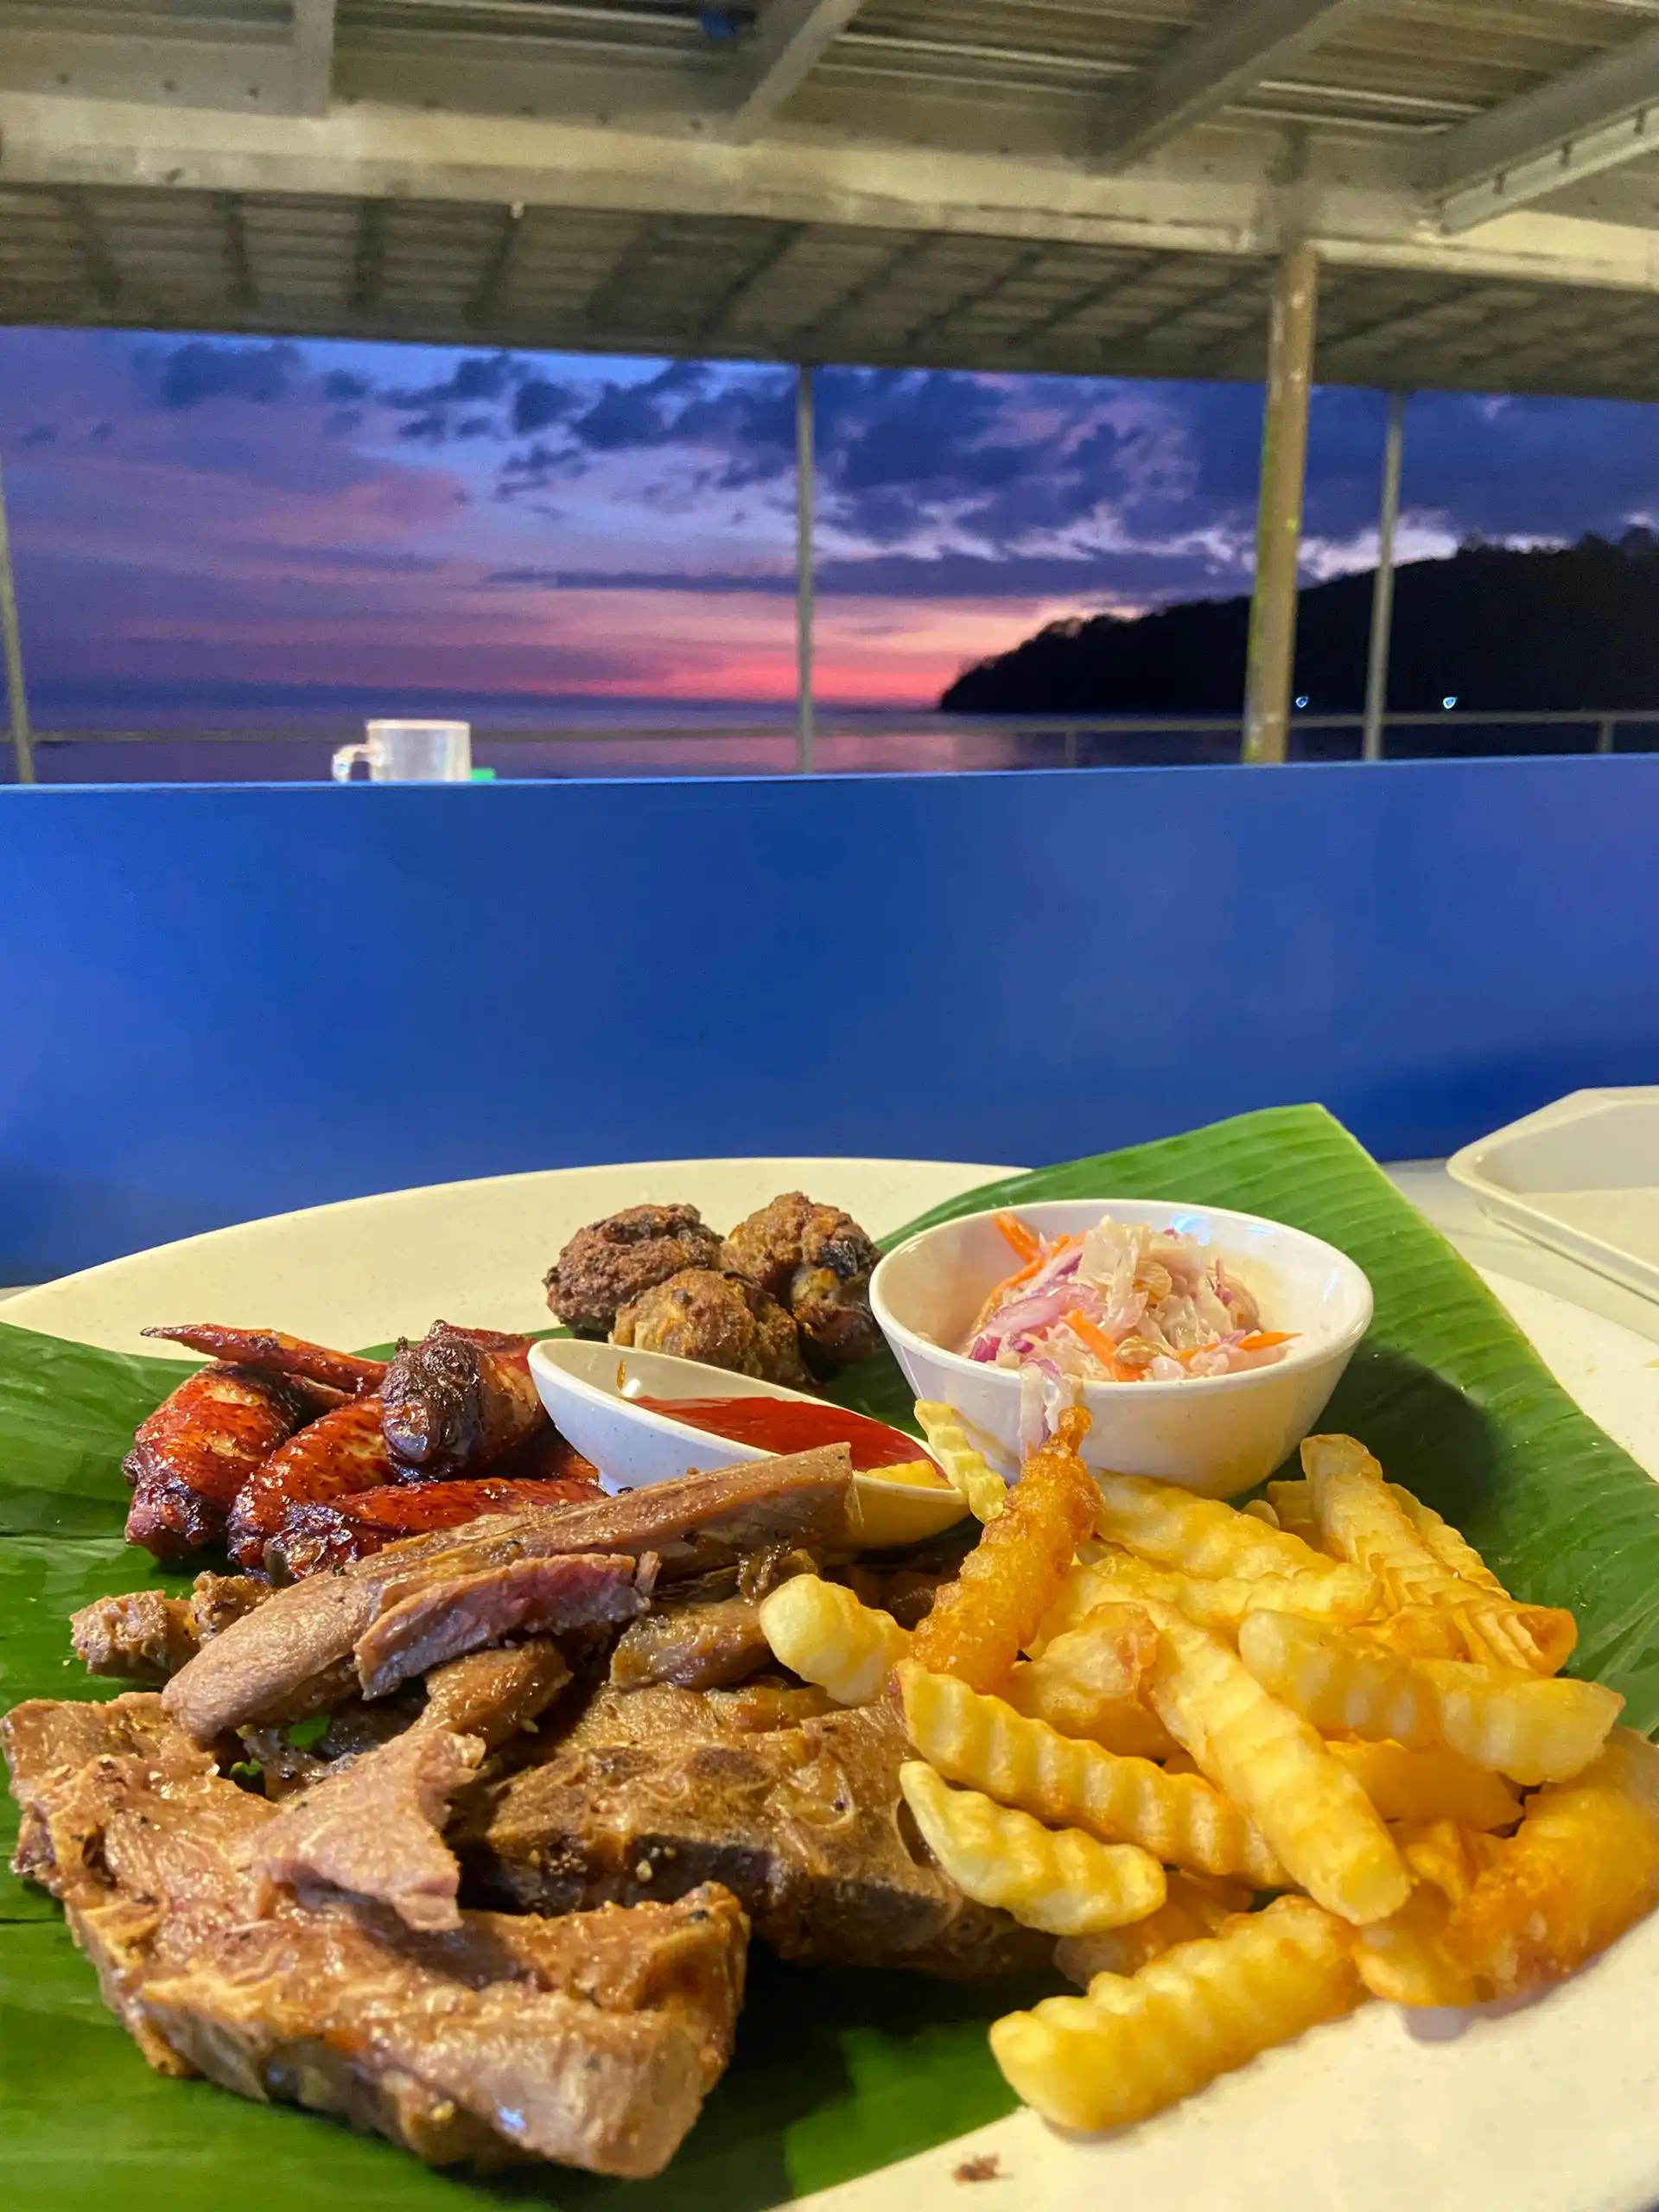 A plate of assorted grilled meats, fries, and coleslaw on a banana leaf, with a sunset over the ocean in the background.